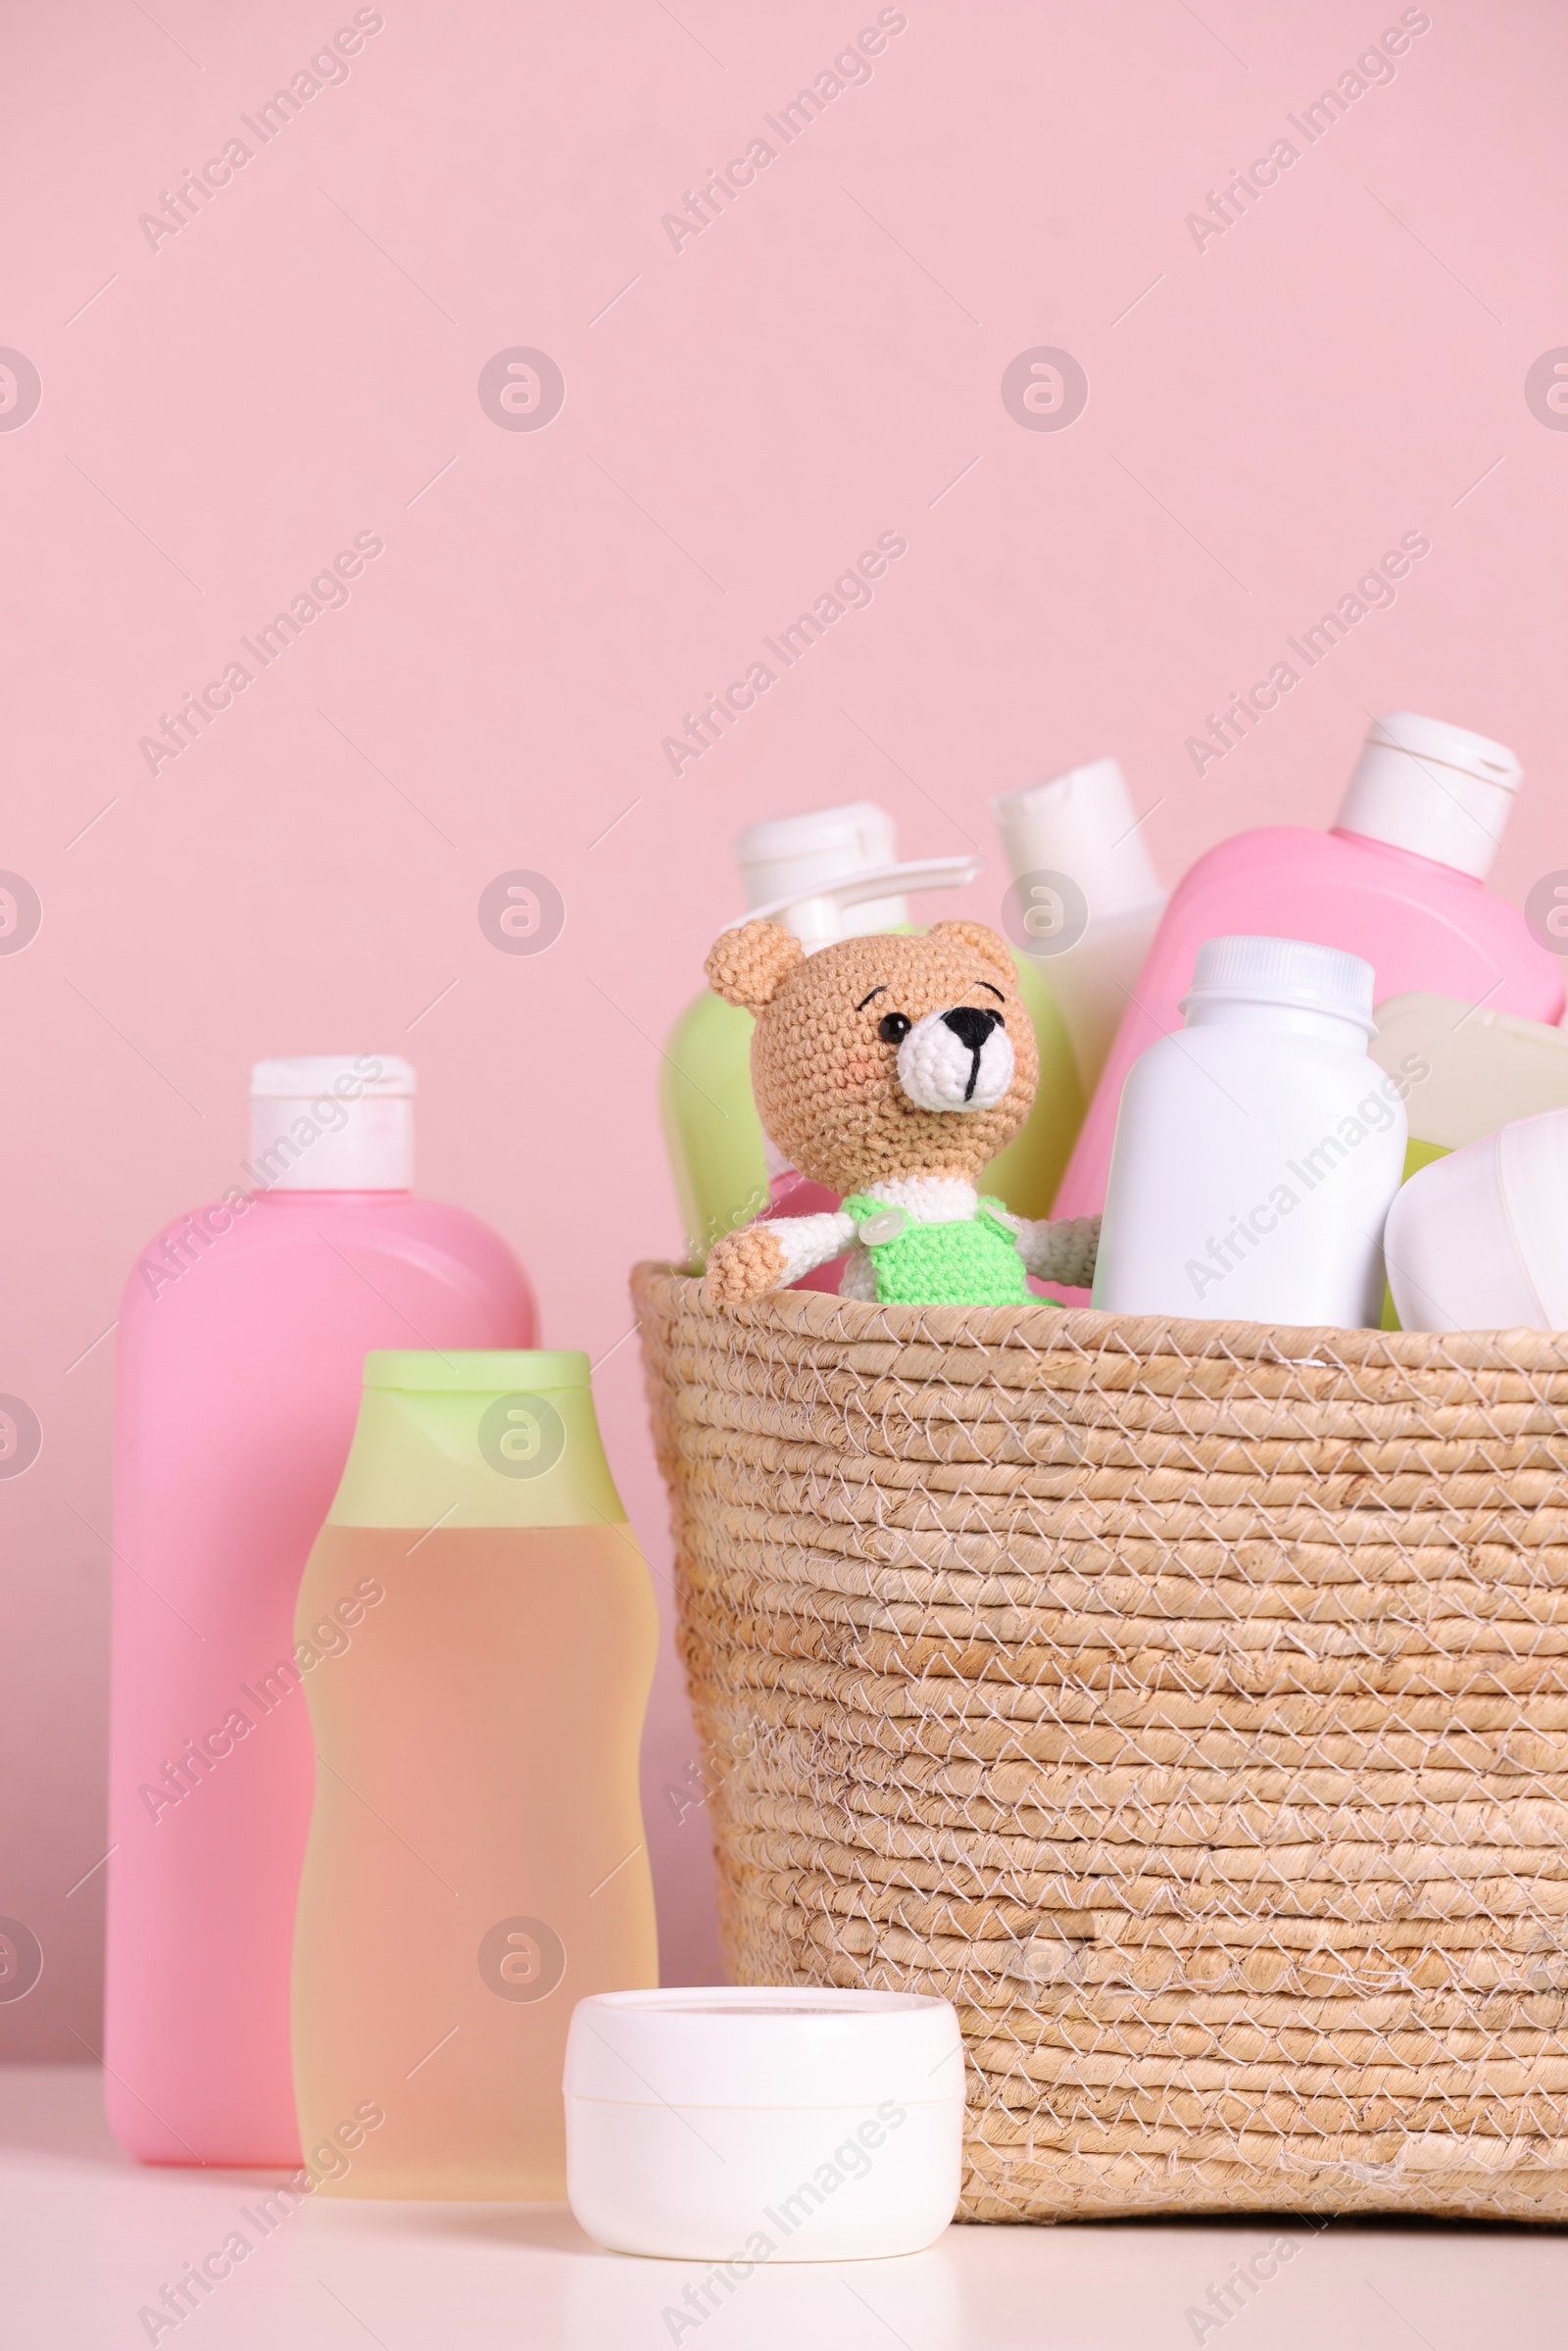 Photo of Baby cosmetic products, bath accessories and toy in wicker basket on white table against pink background